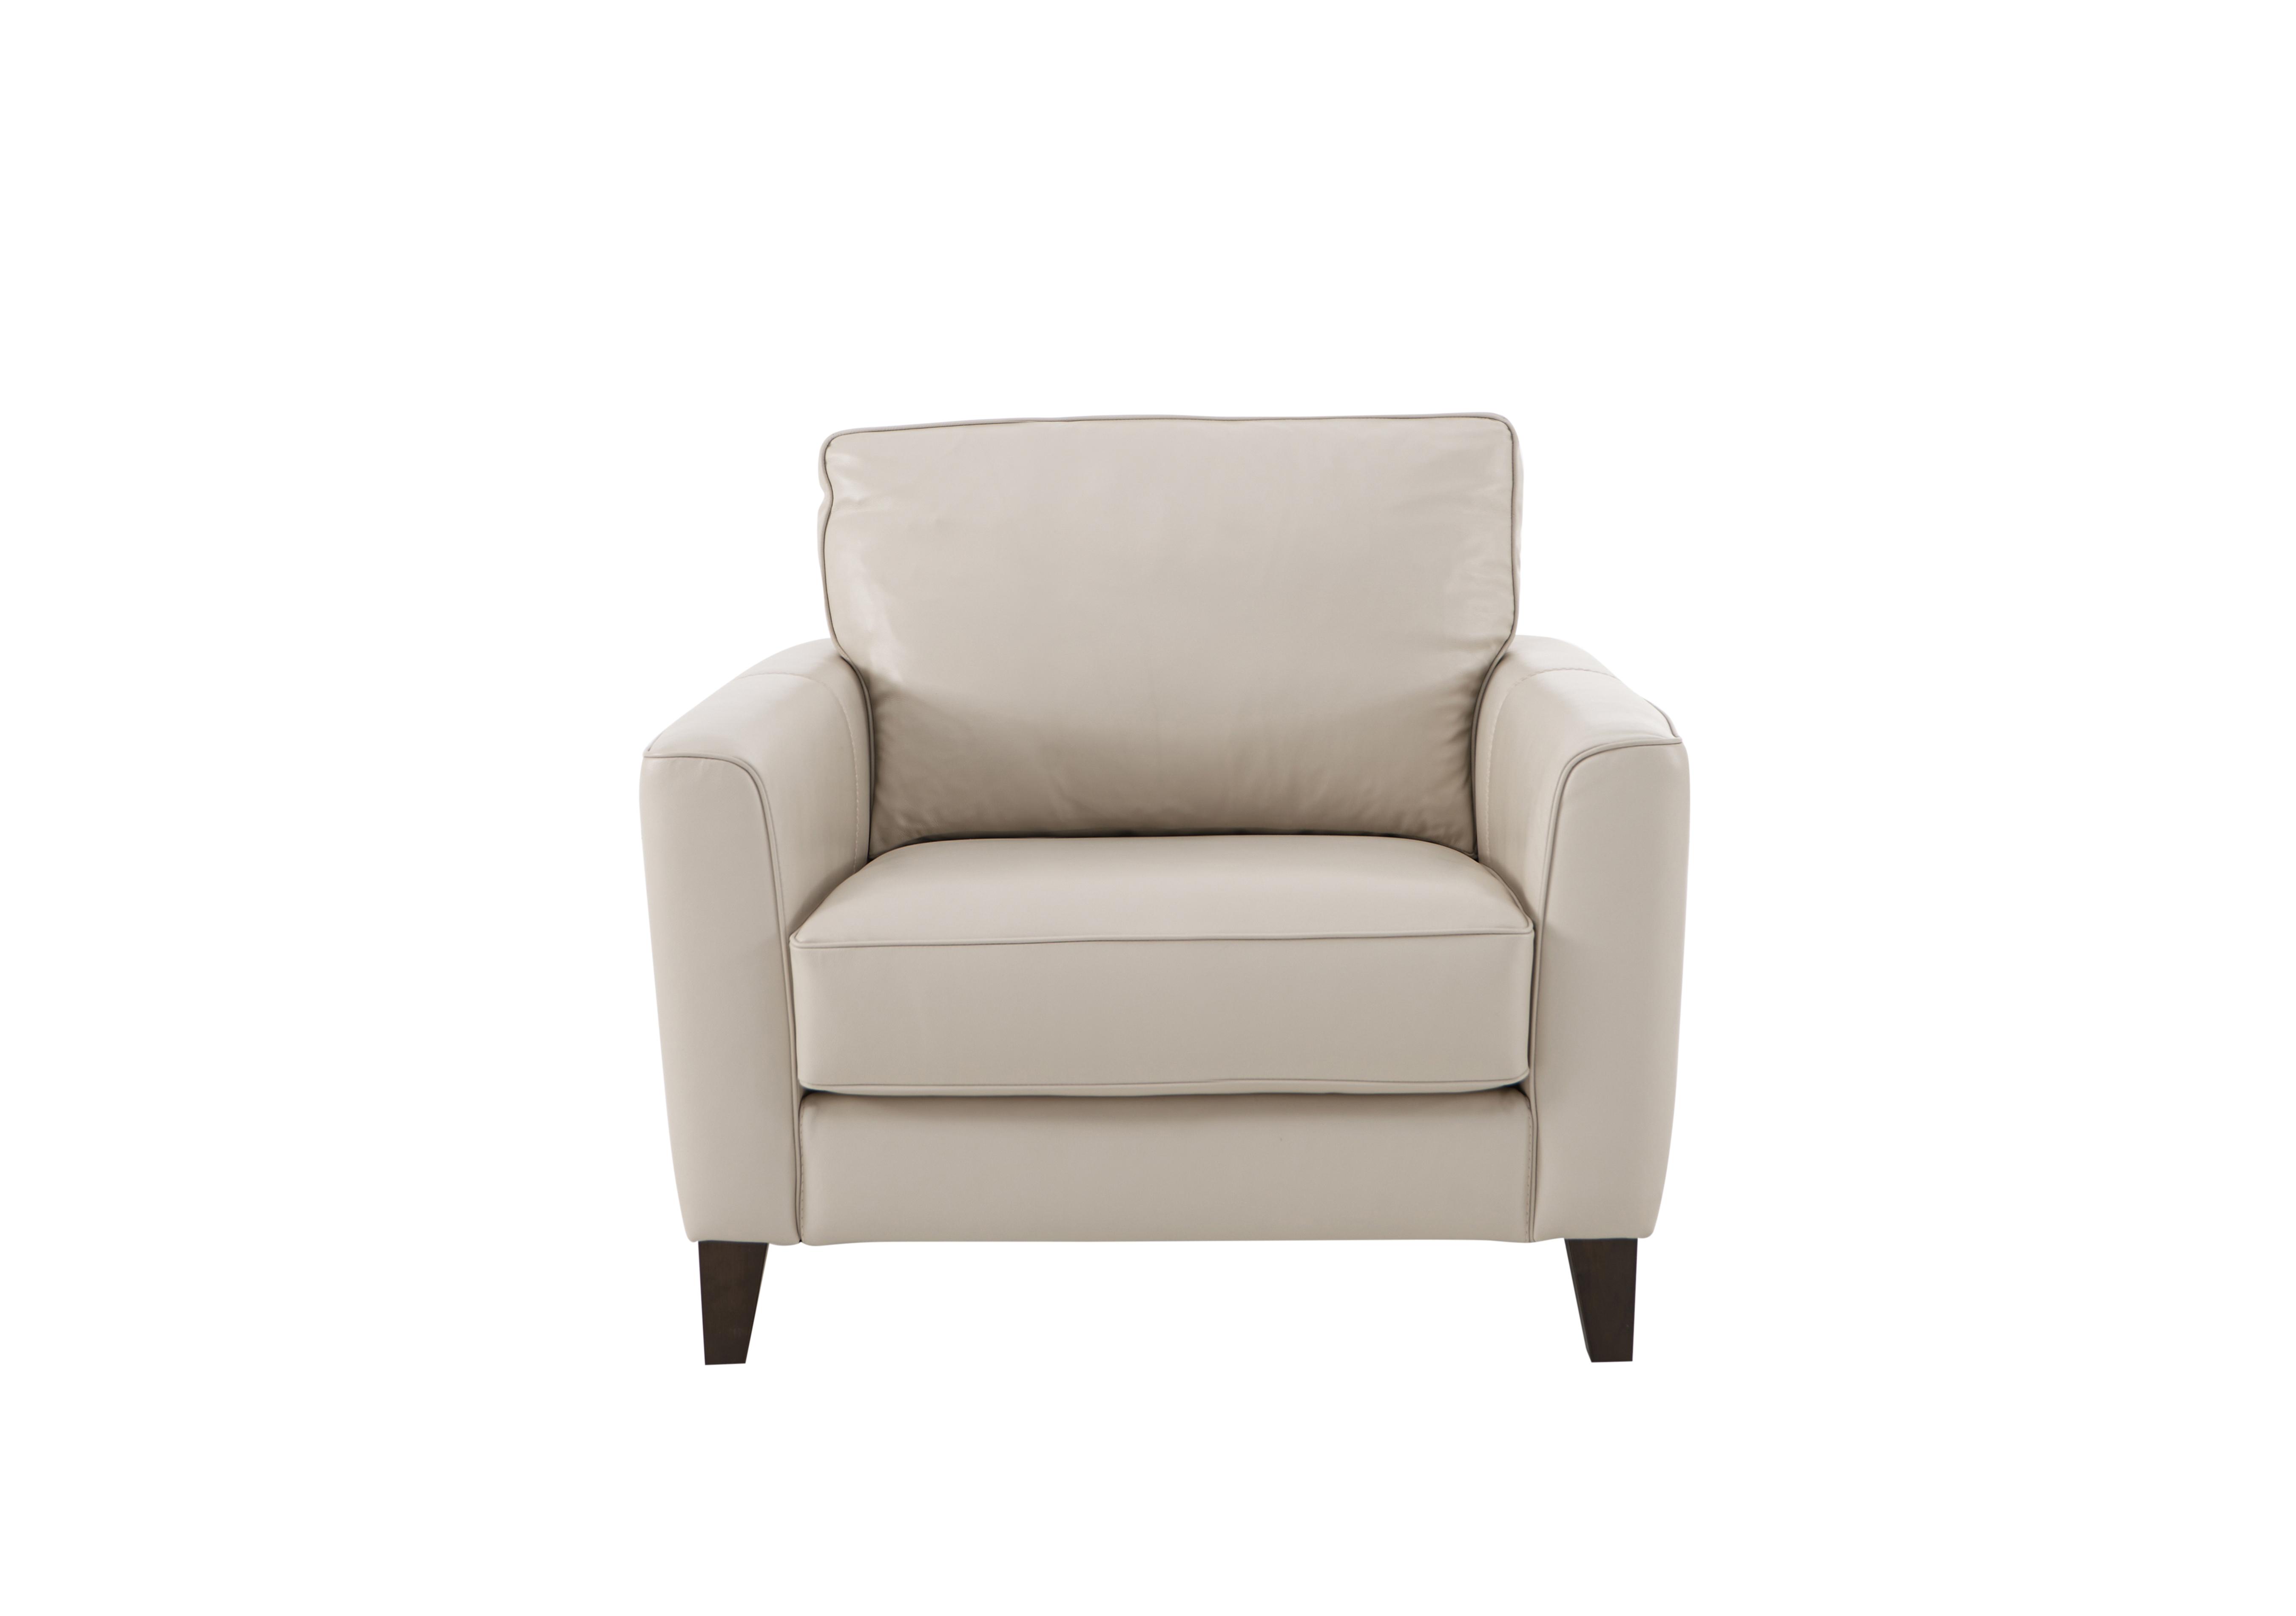 Brondby Leather Armchair in Bv-156e Frost on Furniture Village